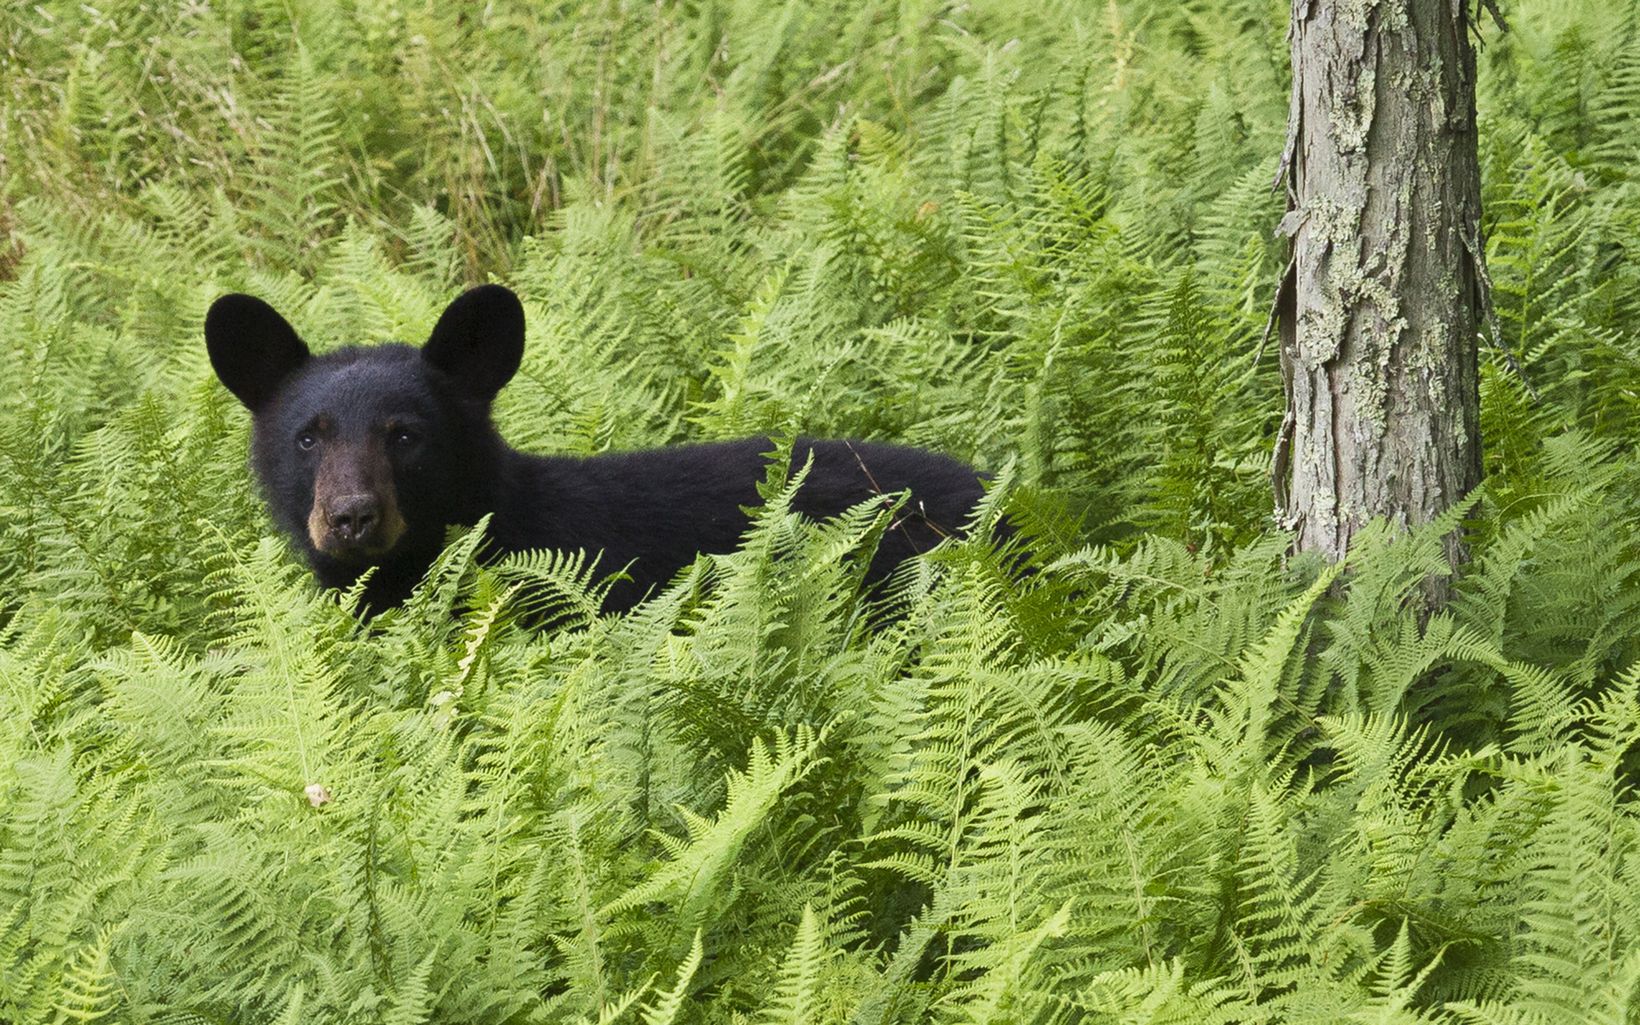 A black bear peeks out from green ferns.